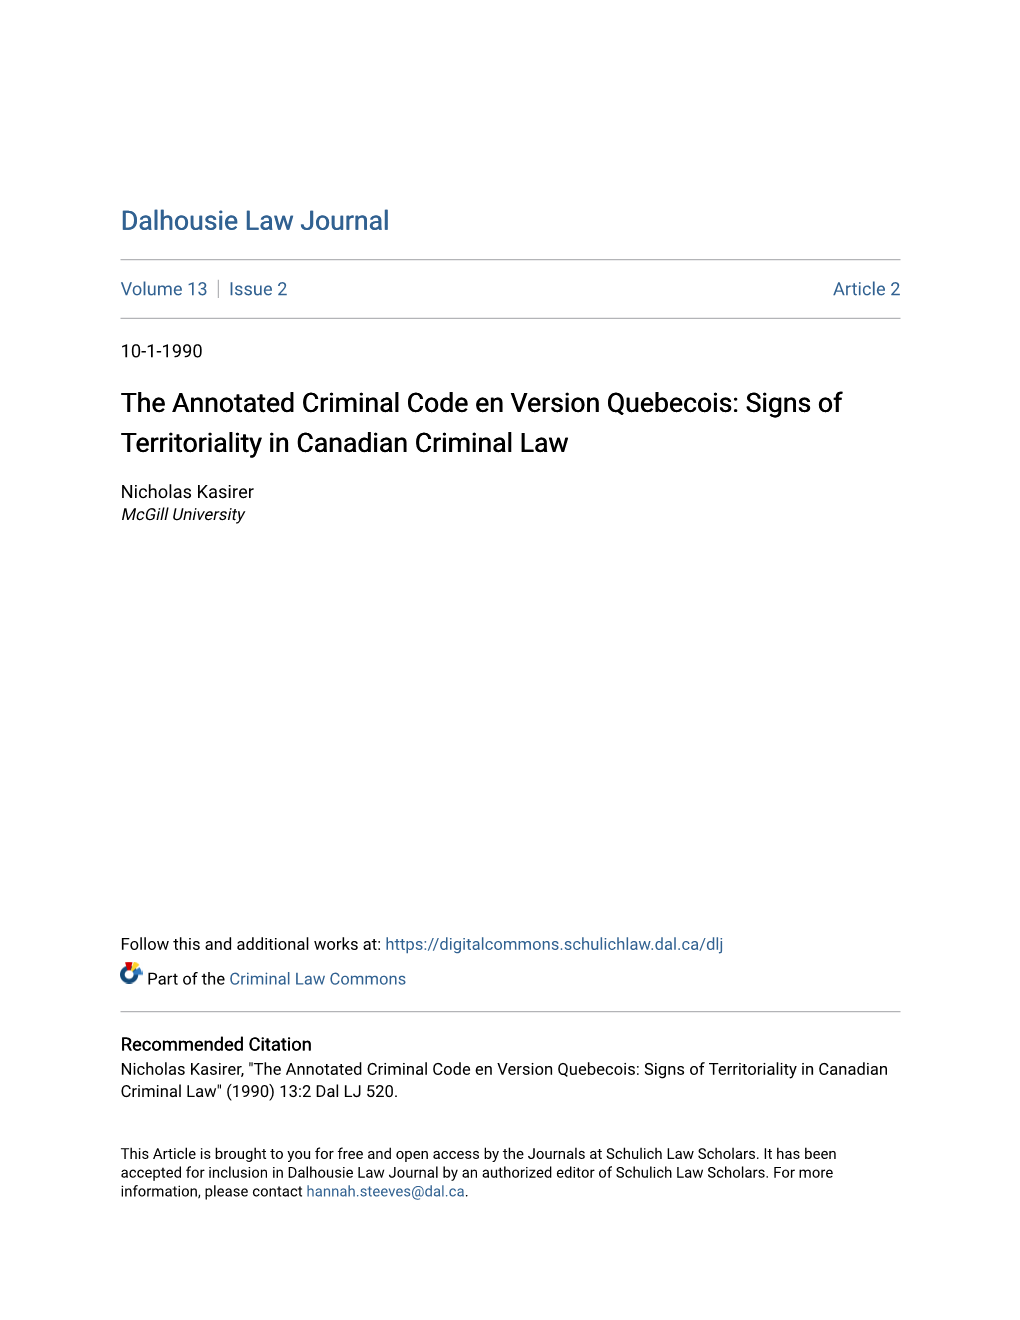 The Annotated Criminal Code En Version Quebecois: Signs of Territoriality in Canadian Criminal Law